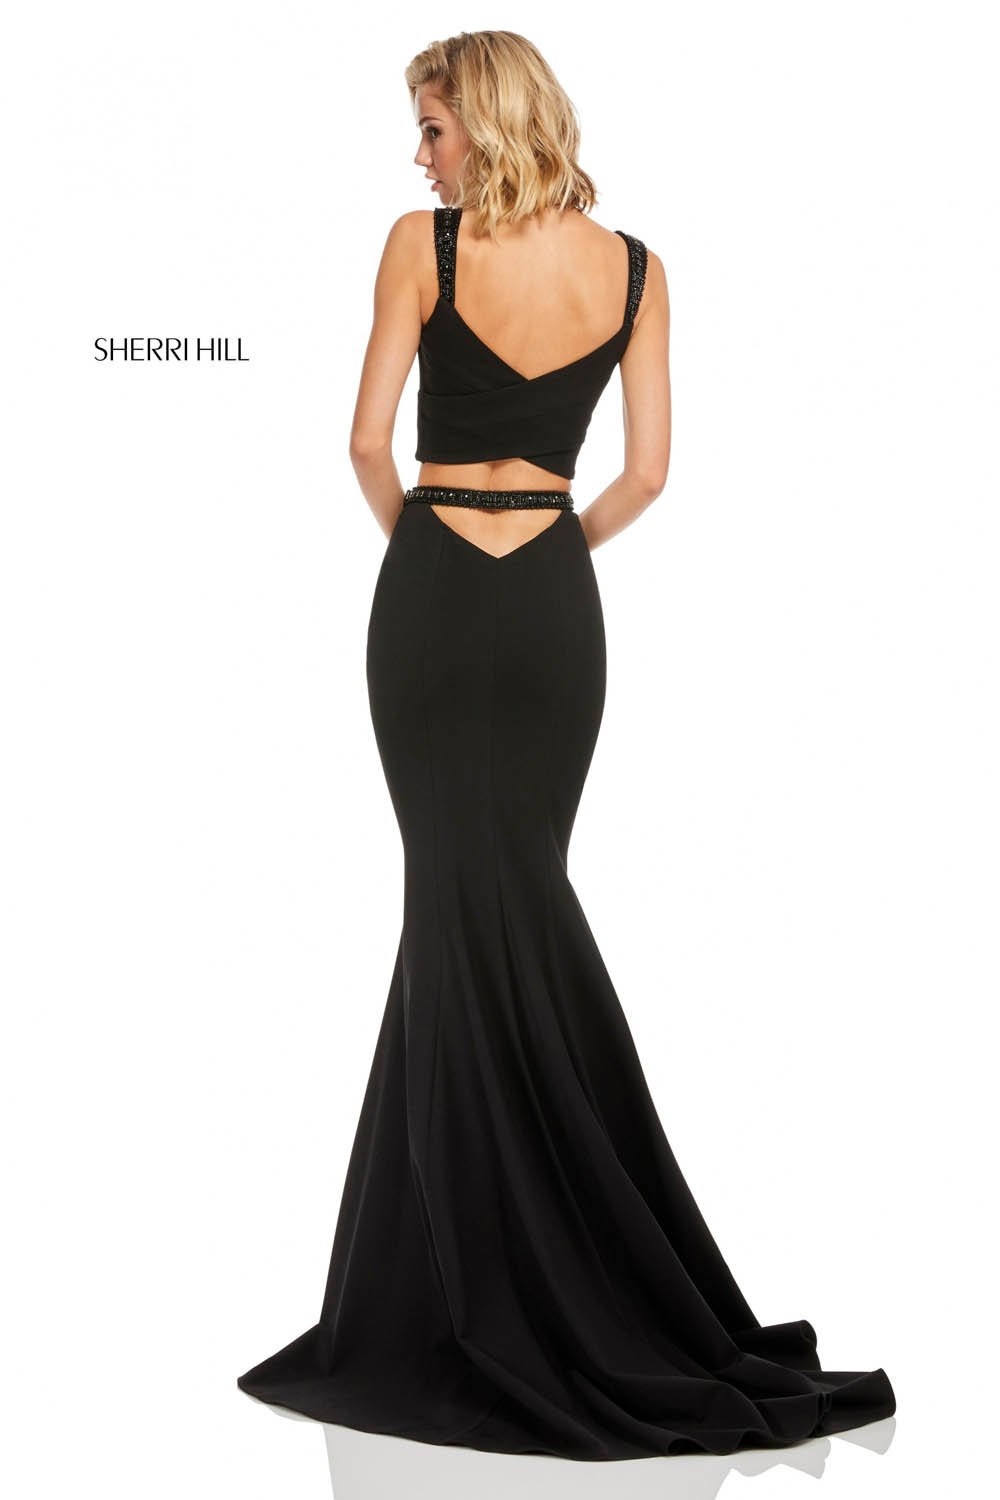 Sherri Hill 52633 dress images in these colors: Black.